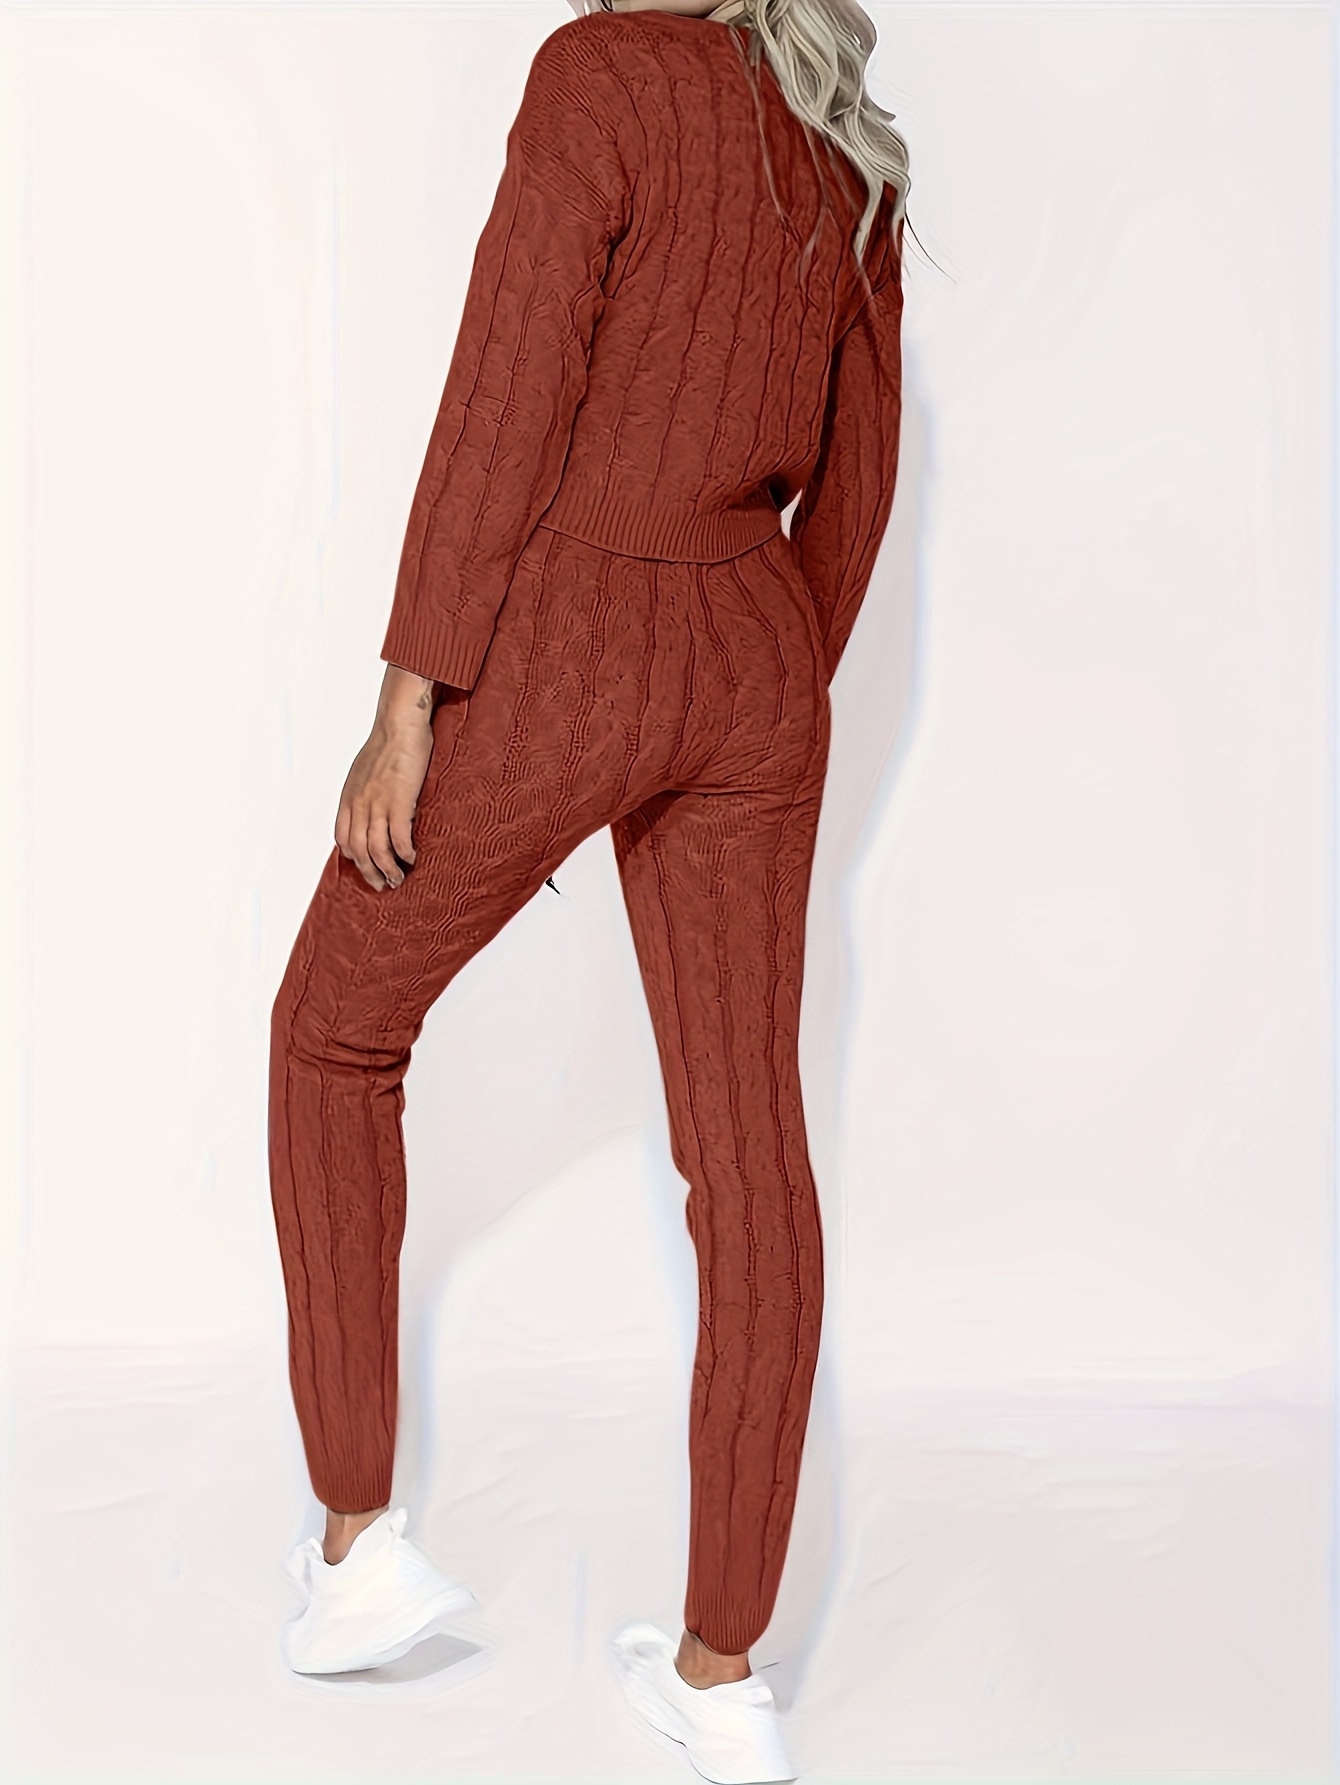 2 Piece Long Sleeve & Pant Set Cable Knit Loungeset Matching